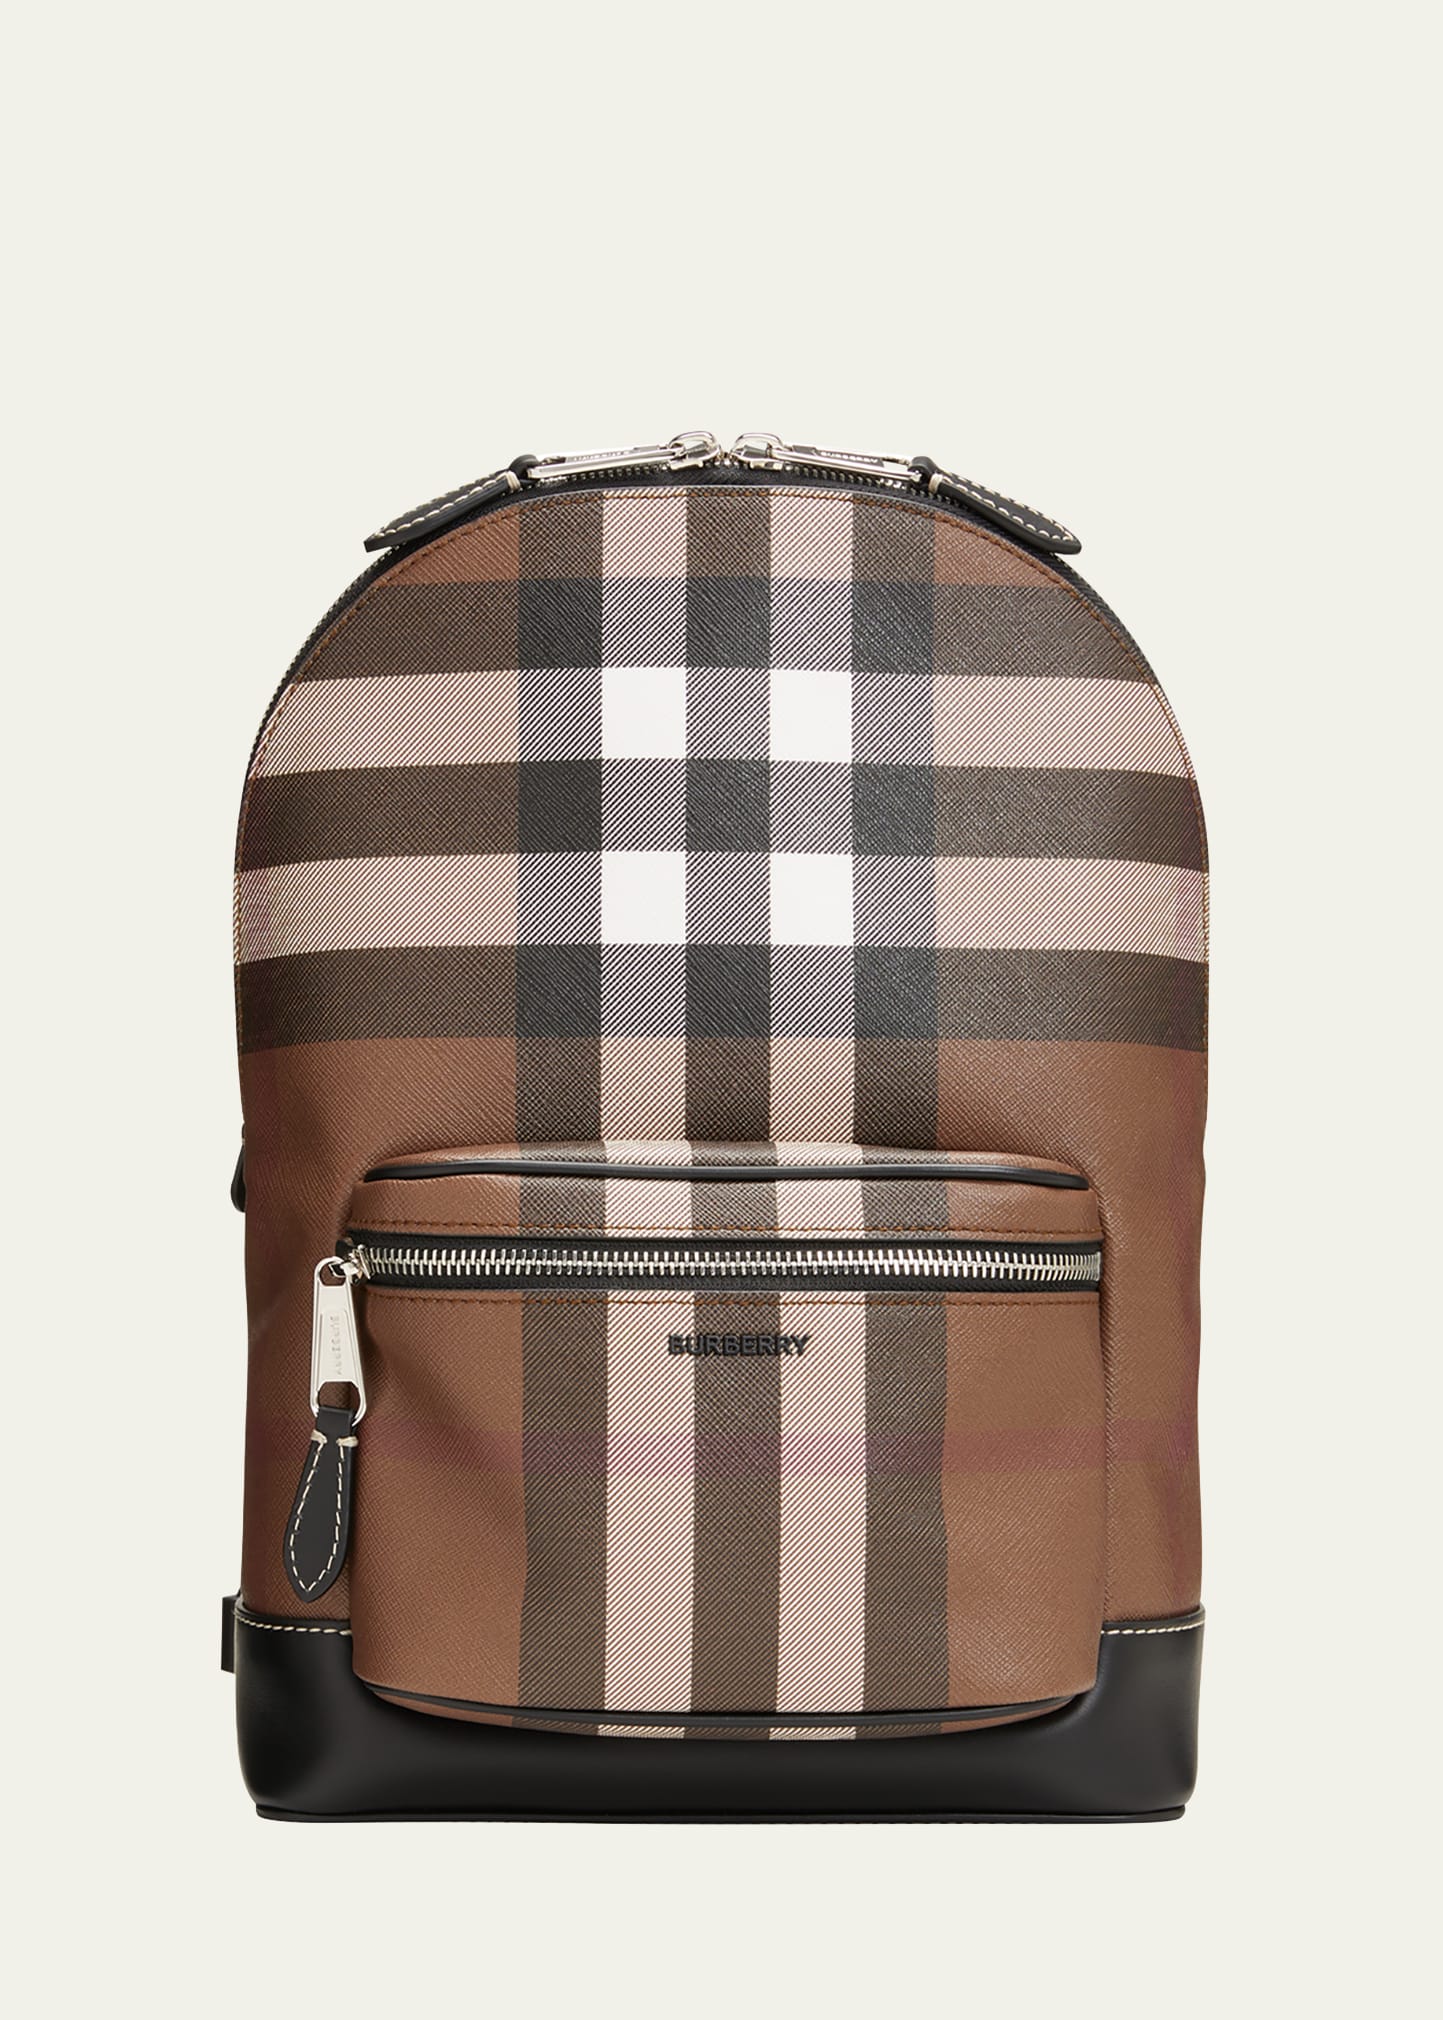 Burberry Men's Check and Leather Crossbody Backpack - Bergdorf Goodman